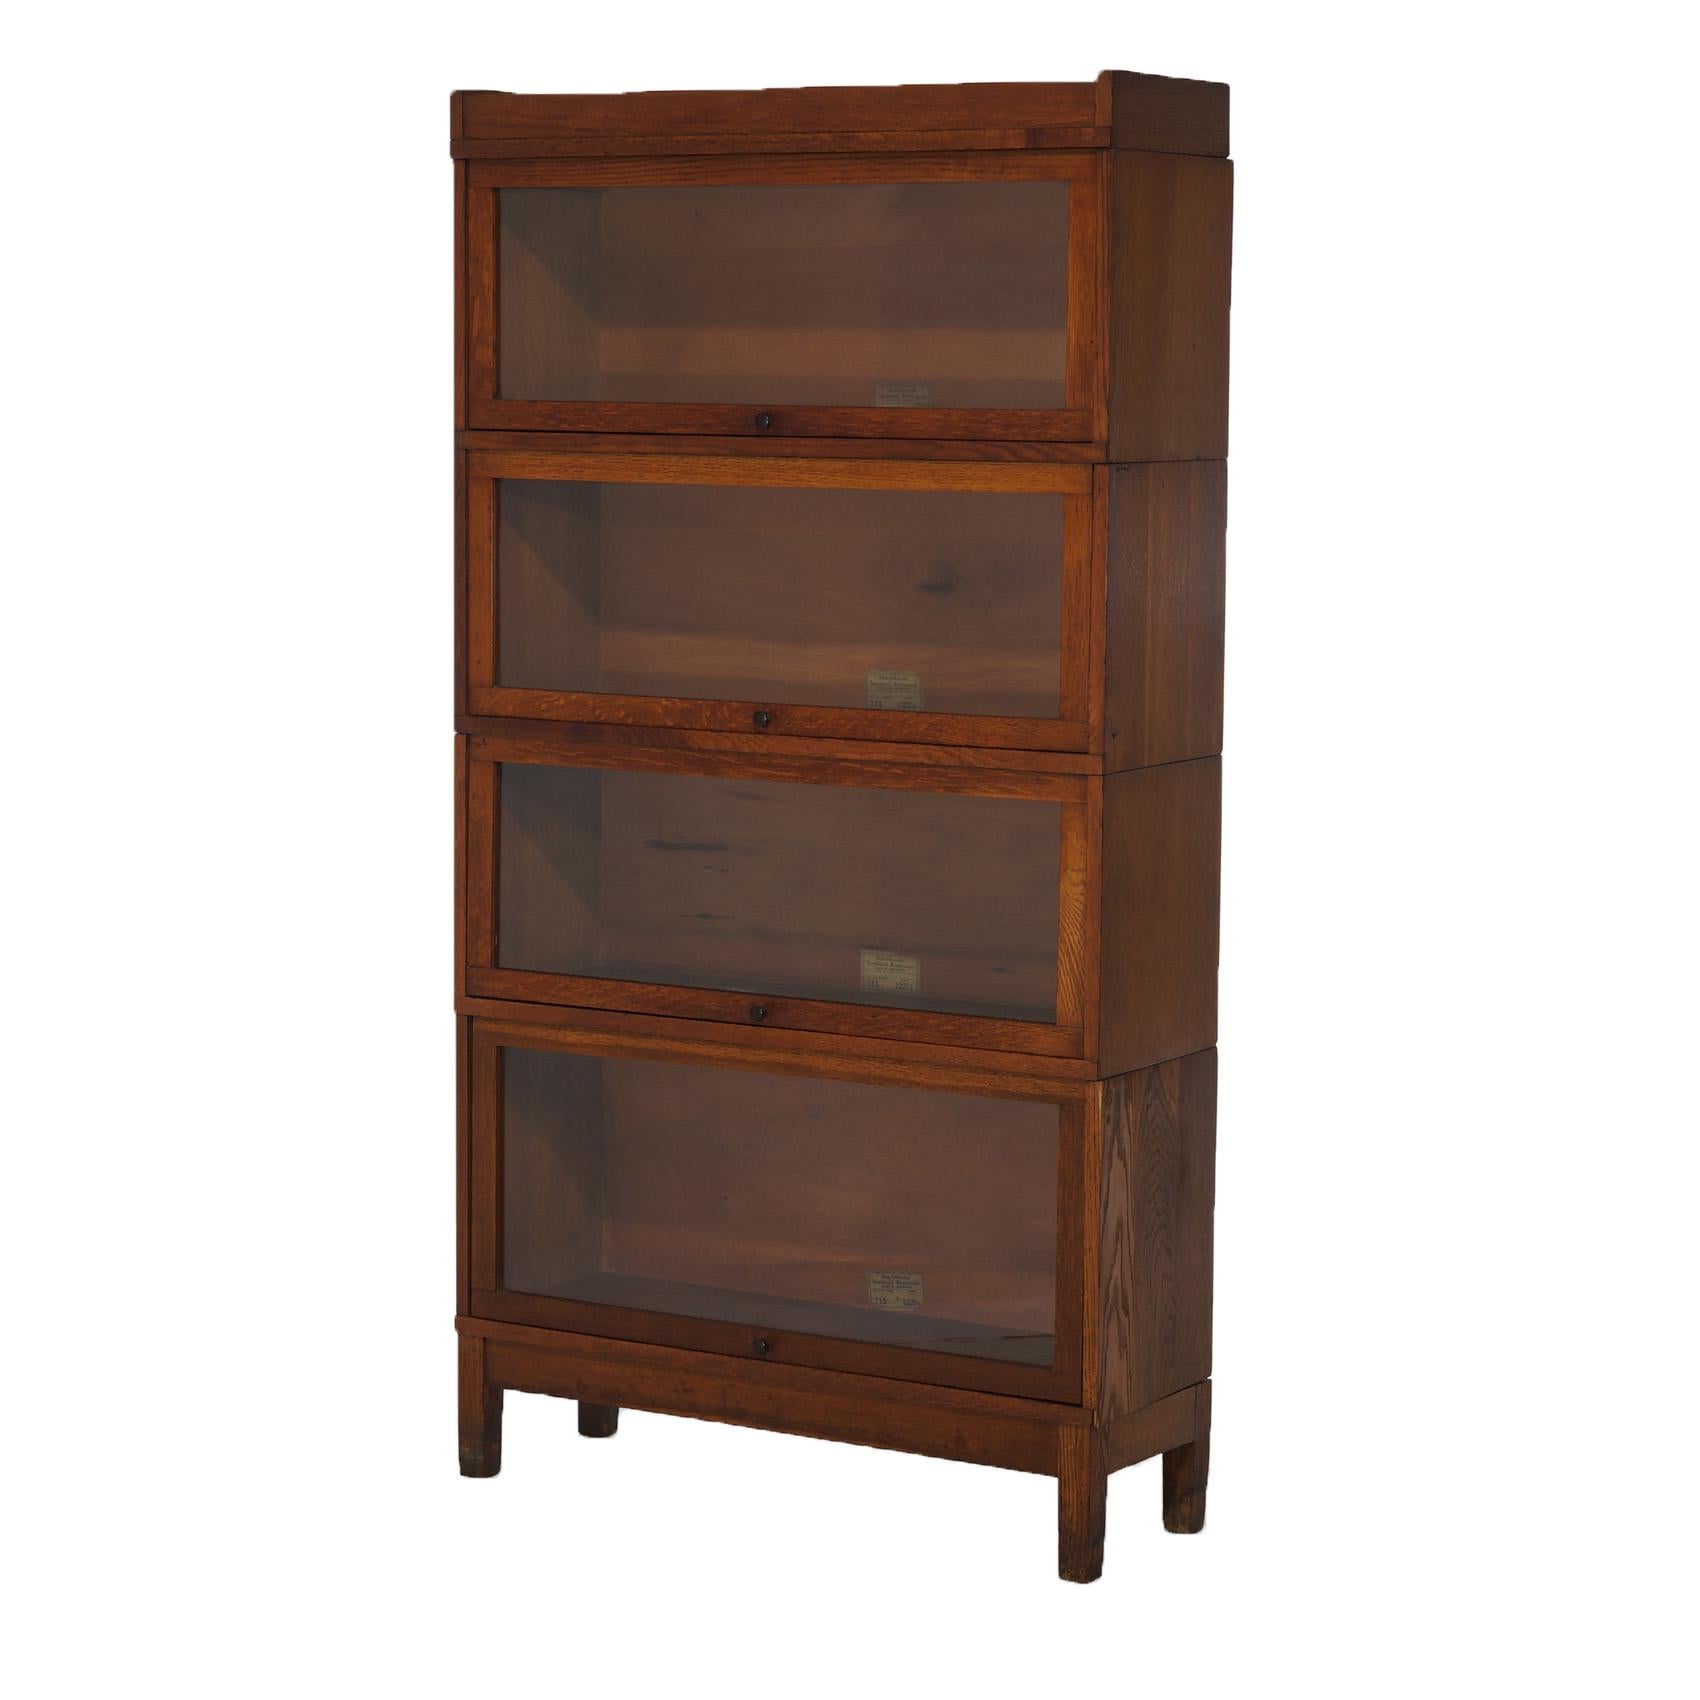 An antique Arts and Crafts Mission barrister bookcase by Globe Wernicke offers quarter sawn oak construction with four stacks, each having pullout glass doors and raised on square straight legs, maker label as photographed, c1910

Measures- overall